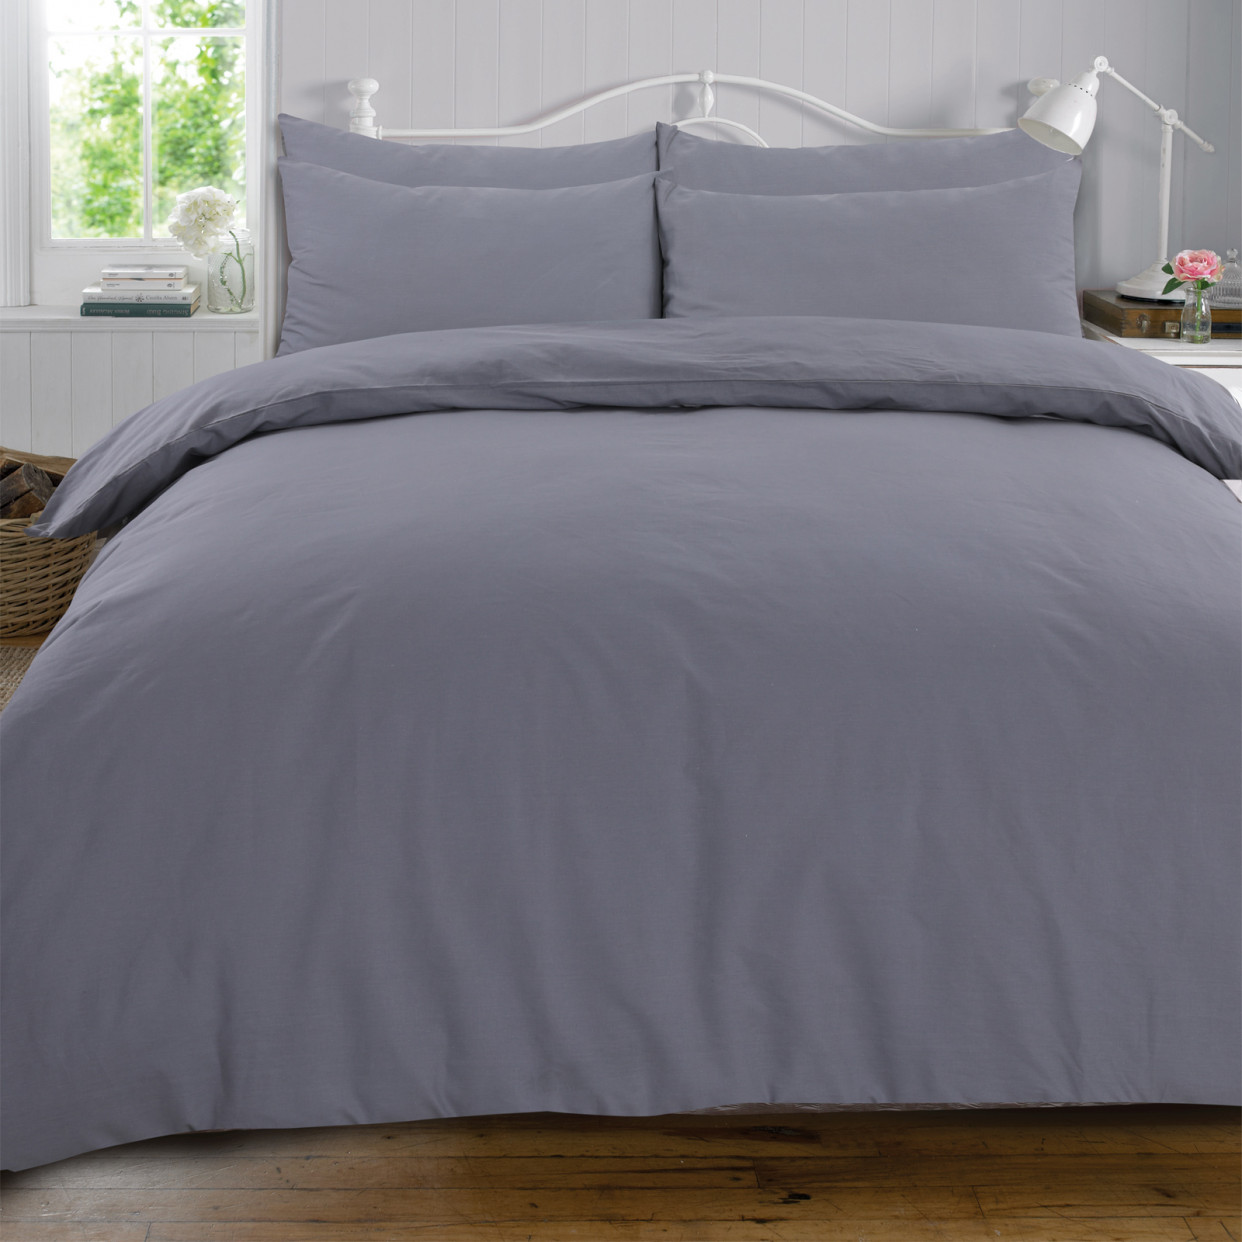 Highams 100% Cotton Bed in a Bag Complete Bedding Set - Grey>